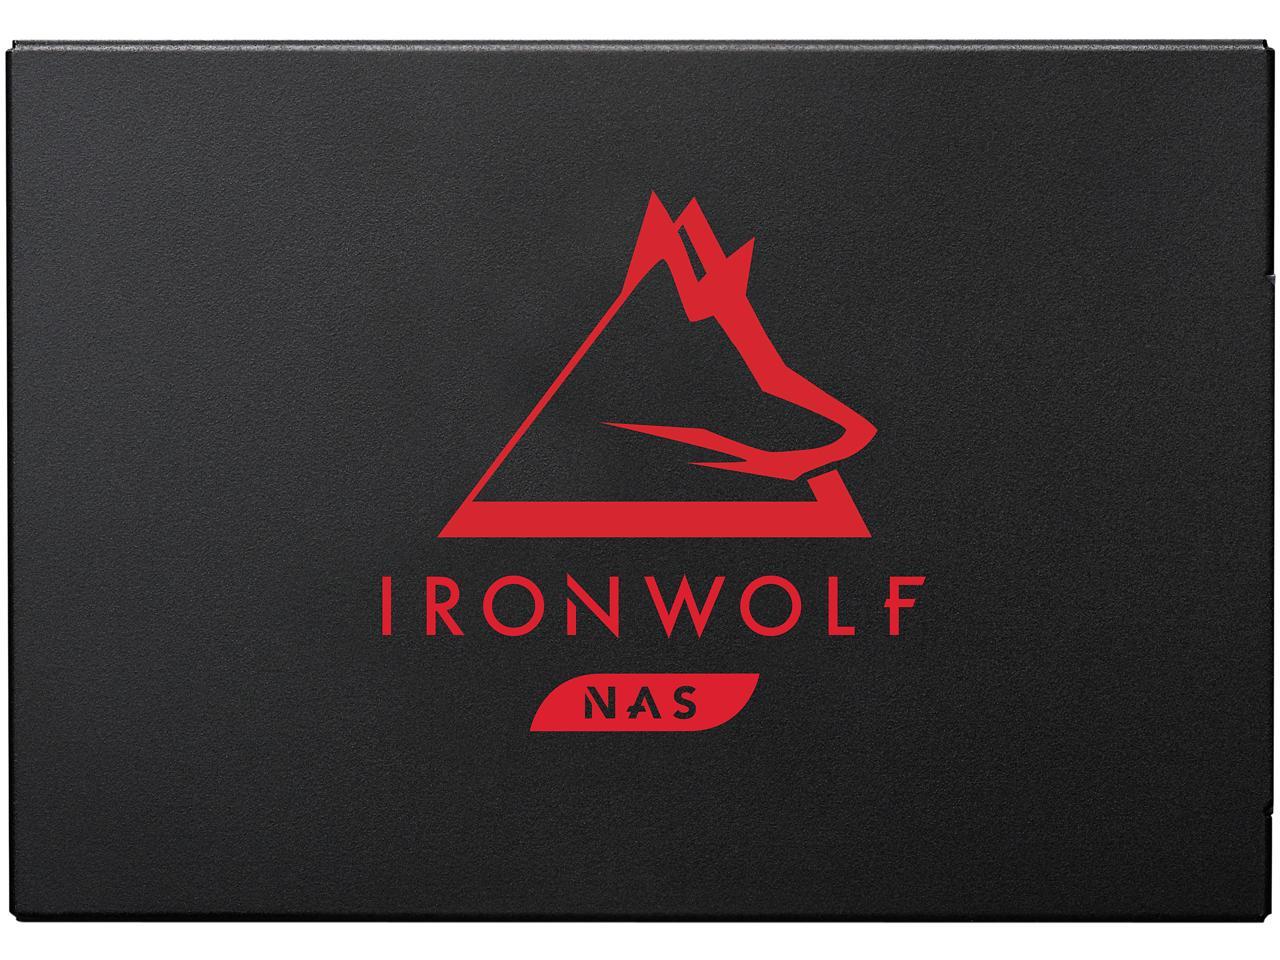 Seagate IronWolf 125 SSD 250GB NAS Internal Solid State Drive - 2.5 Inch SATA 6Gb/s Speeds of up to 560 MB/s, 0.6 DWPD Endurance and 24x7 Performance for Creative Pro and SMB/SME (ZA250NM1A002)